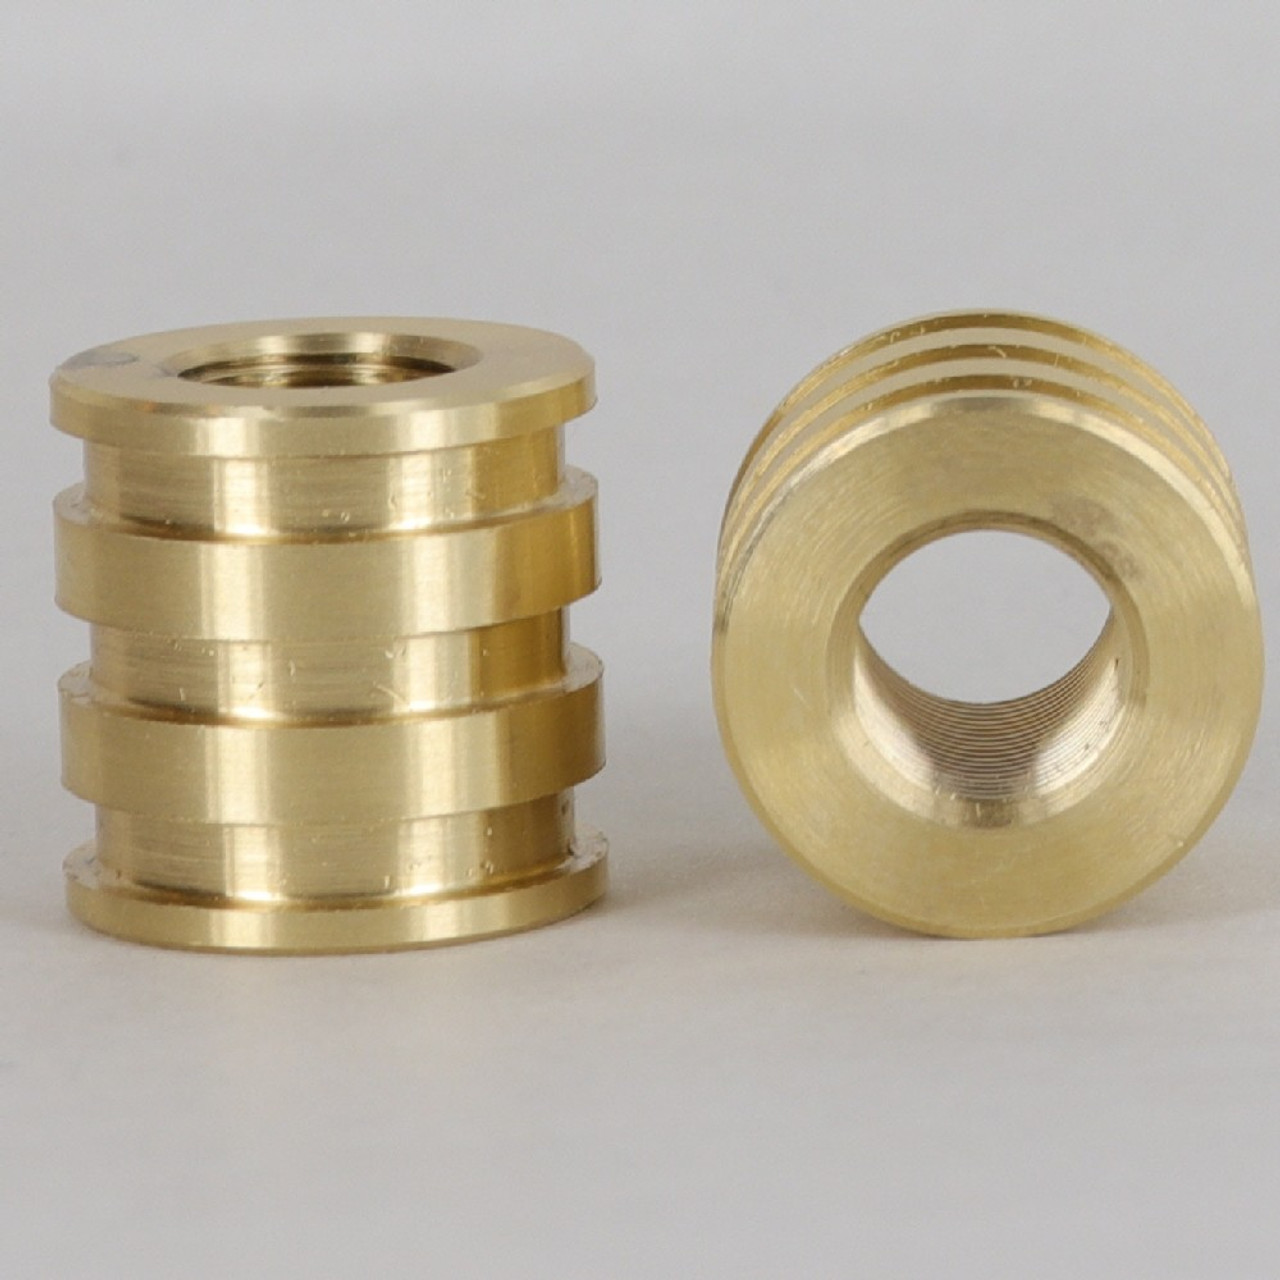 Coupling - Decorative - Solid Brass